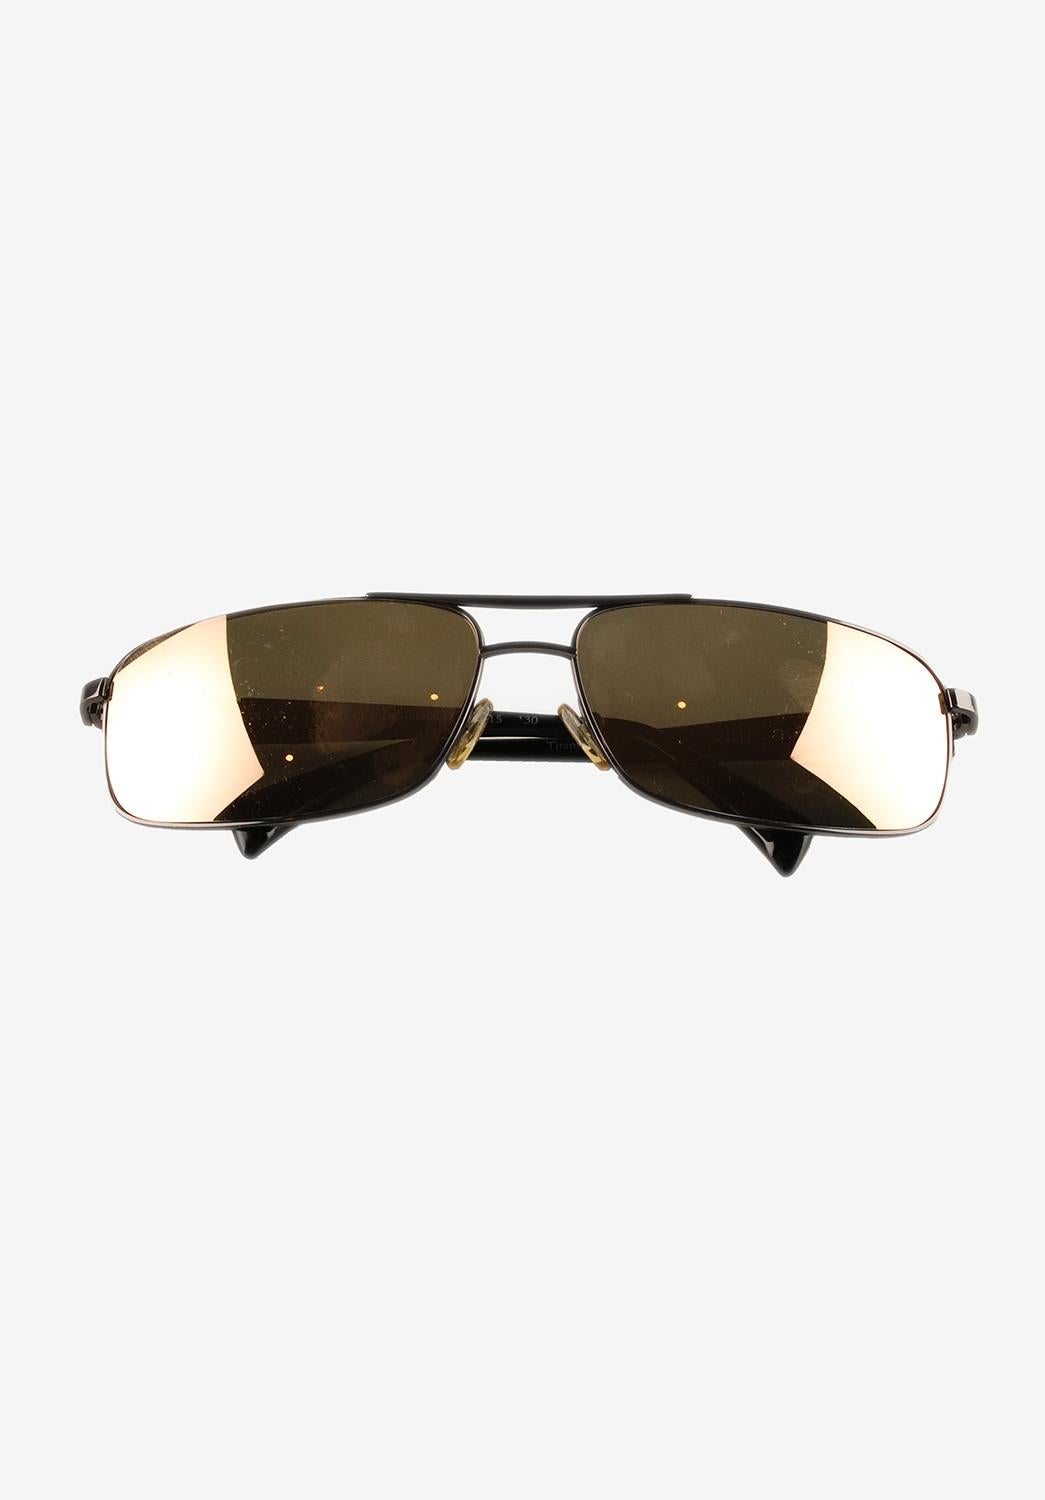 Item for sale is 100% genuine Zilli Titanium Sunglasses
Color: Black
(An actual color may a bit vary due to individual computer screen interpretation)
This jacket is great quality item. Rate 9 of 10, excellent condition.
Actual  measurements